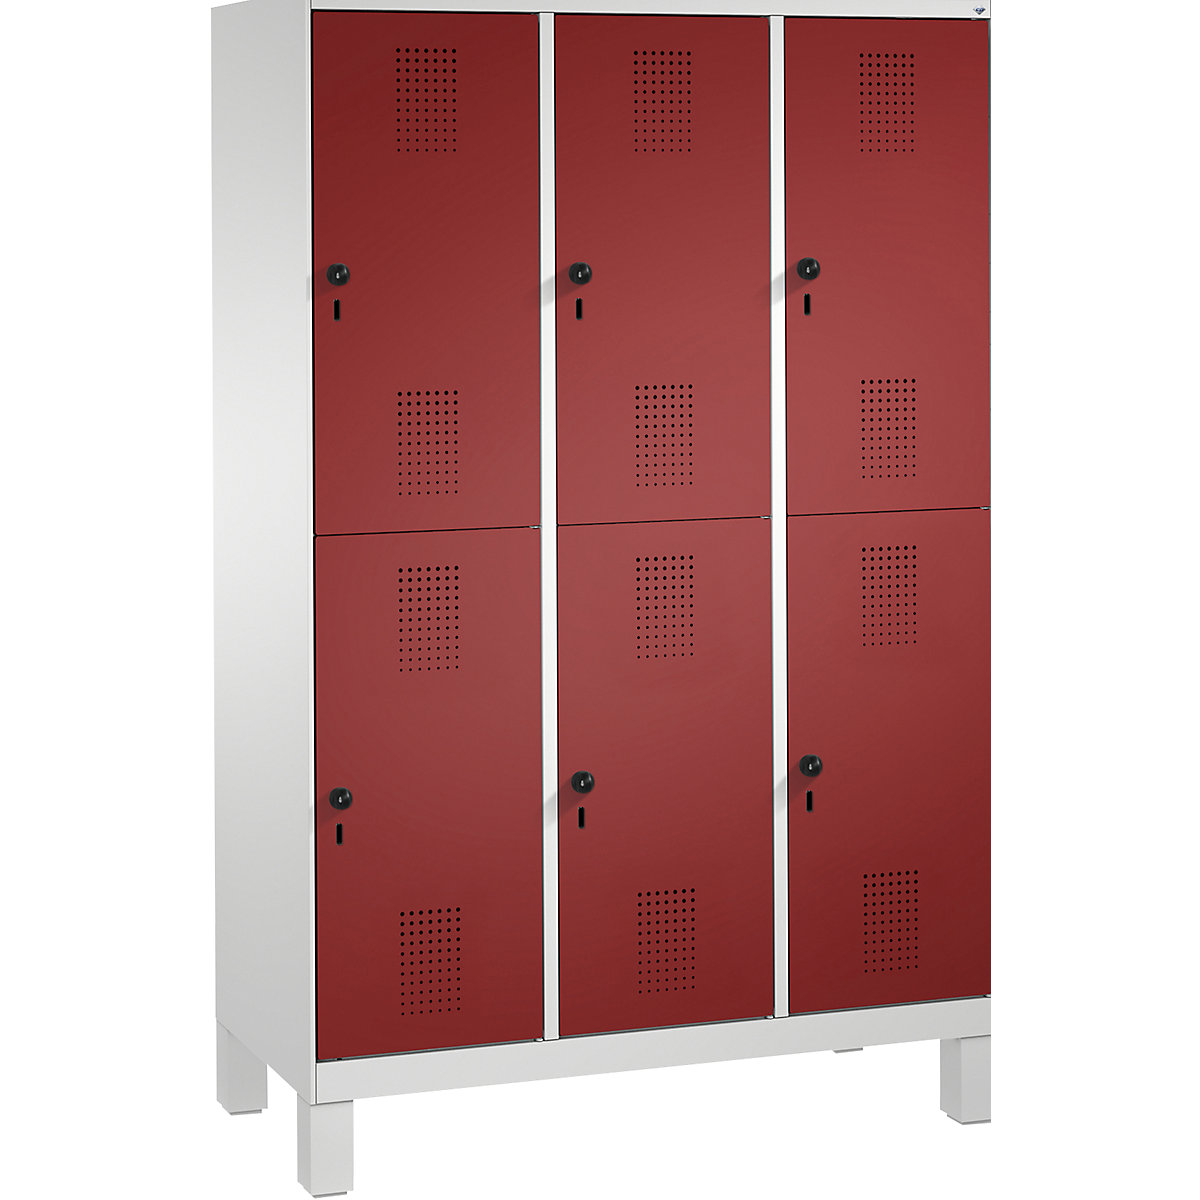 EVOLO cloakroom locker, double tier, with feet – C+P, 3 compartments, 2 shelf compartments each, compartment width 400 mm, light grey / ruby red-14